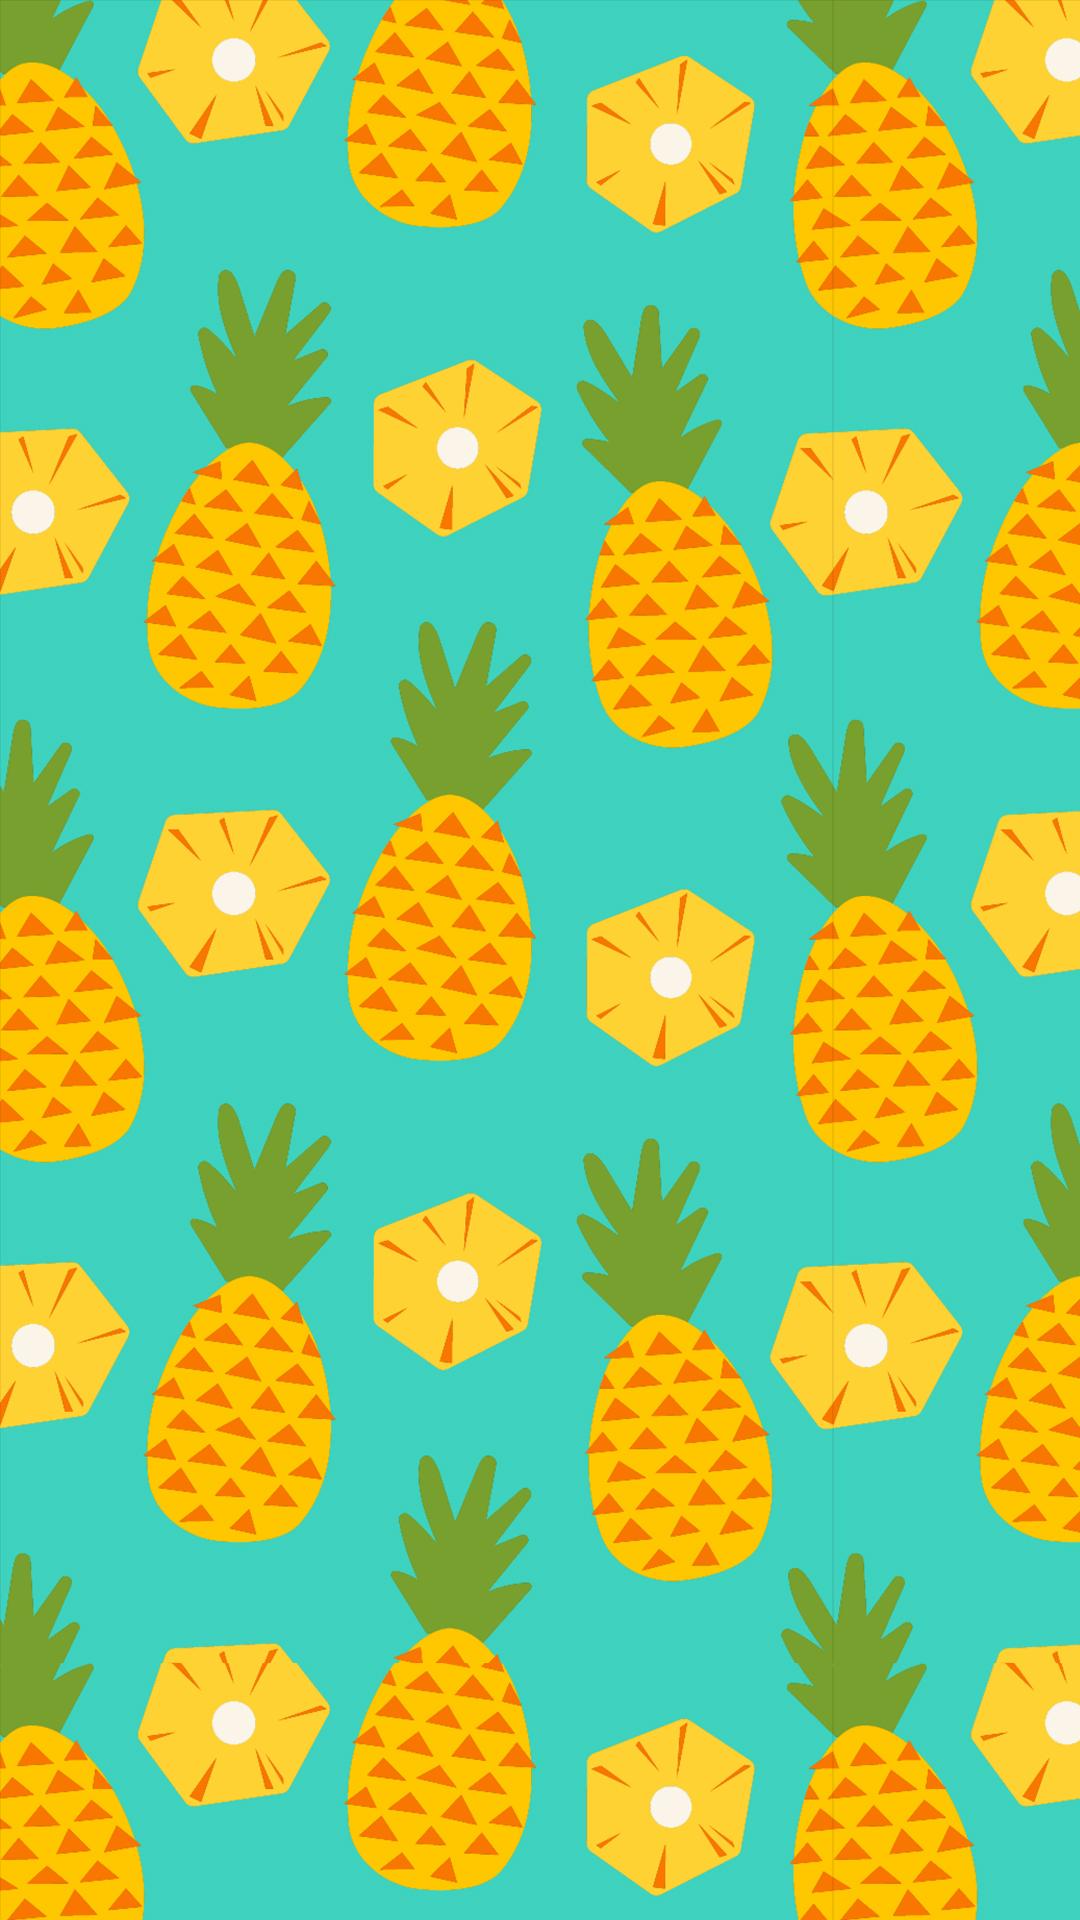 Pineapple HD Wallpaper For Your Mobile Phone